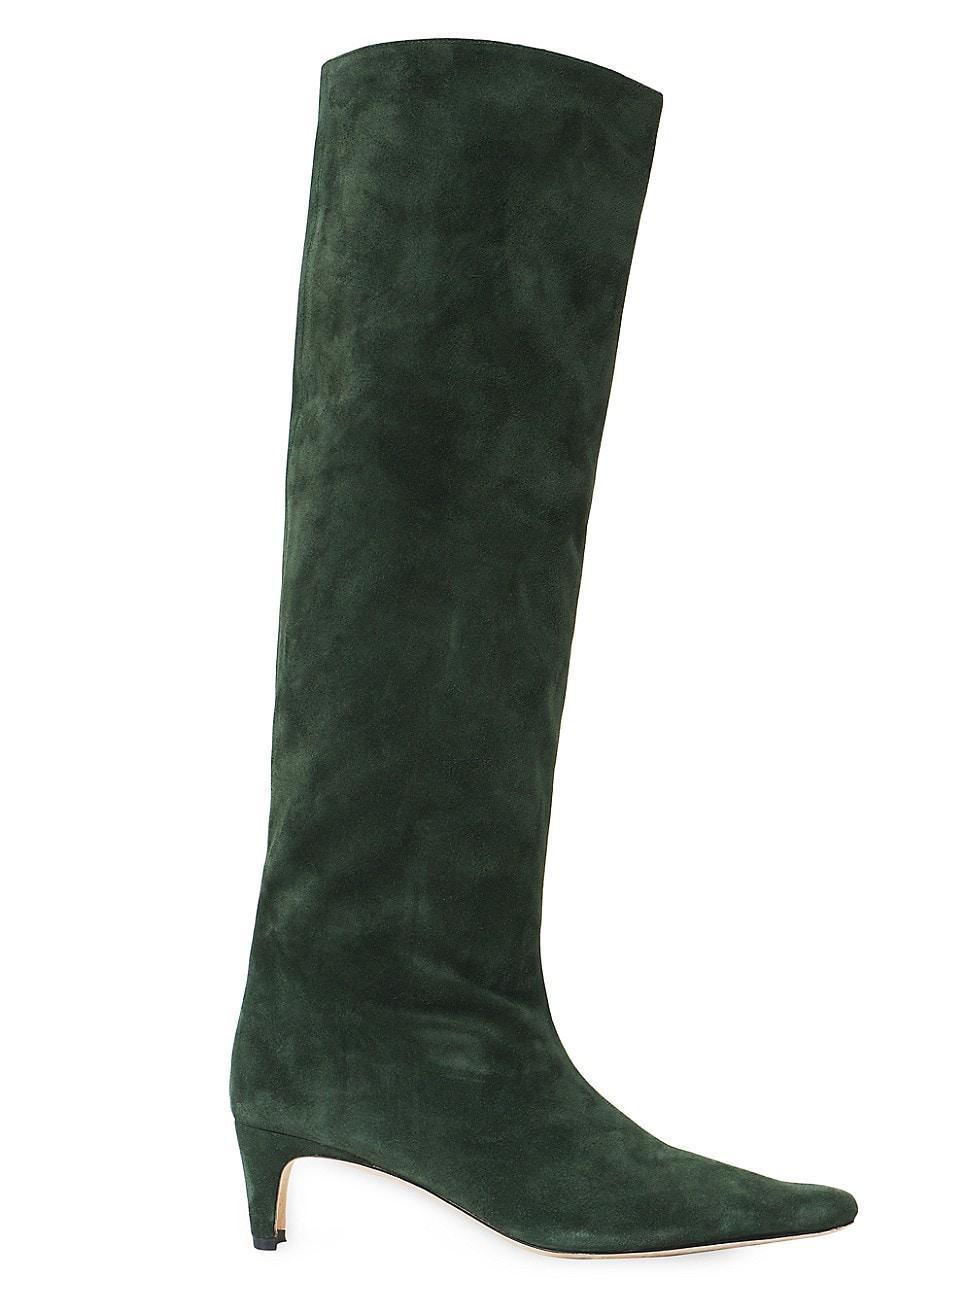 Womens Wally Suede Knee-High Boots Product Image